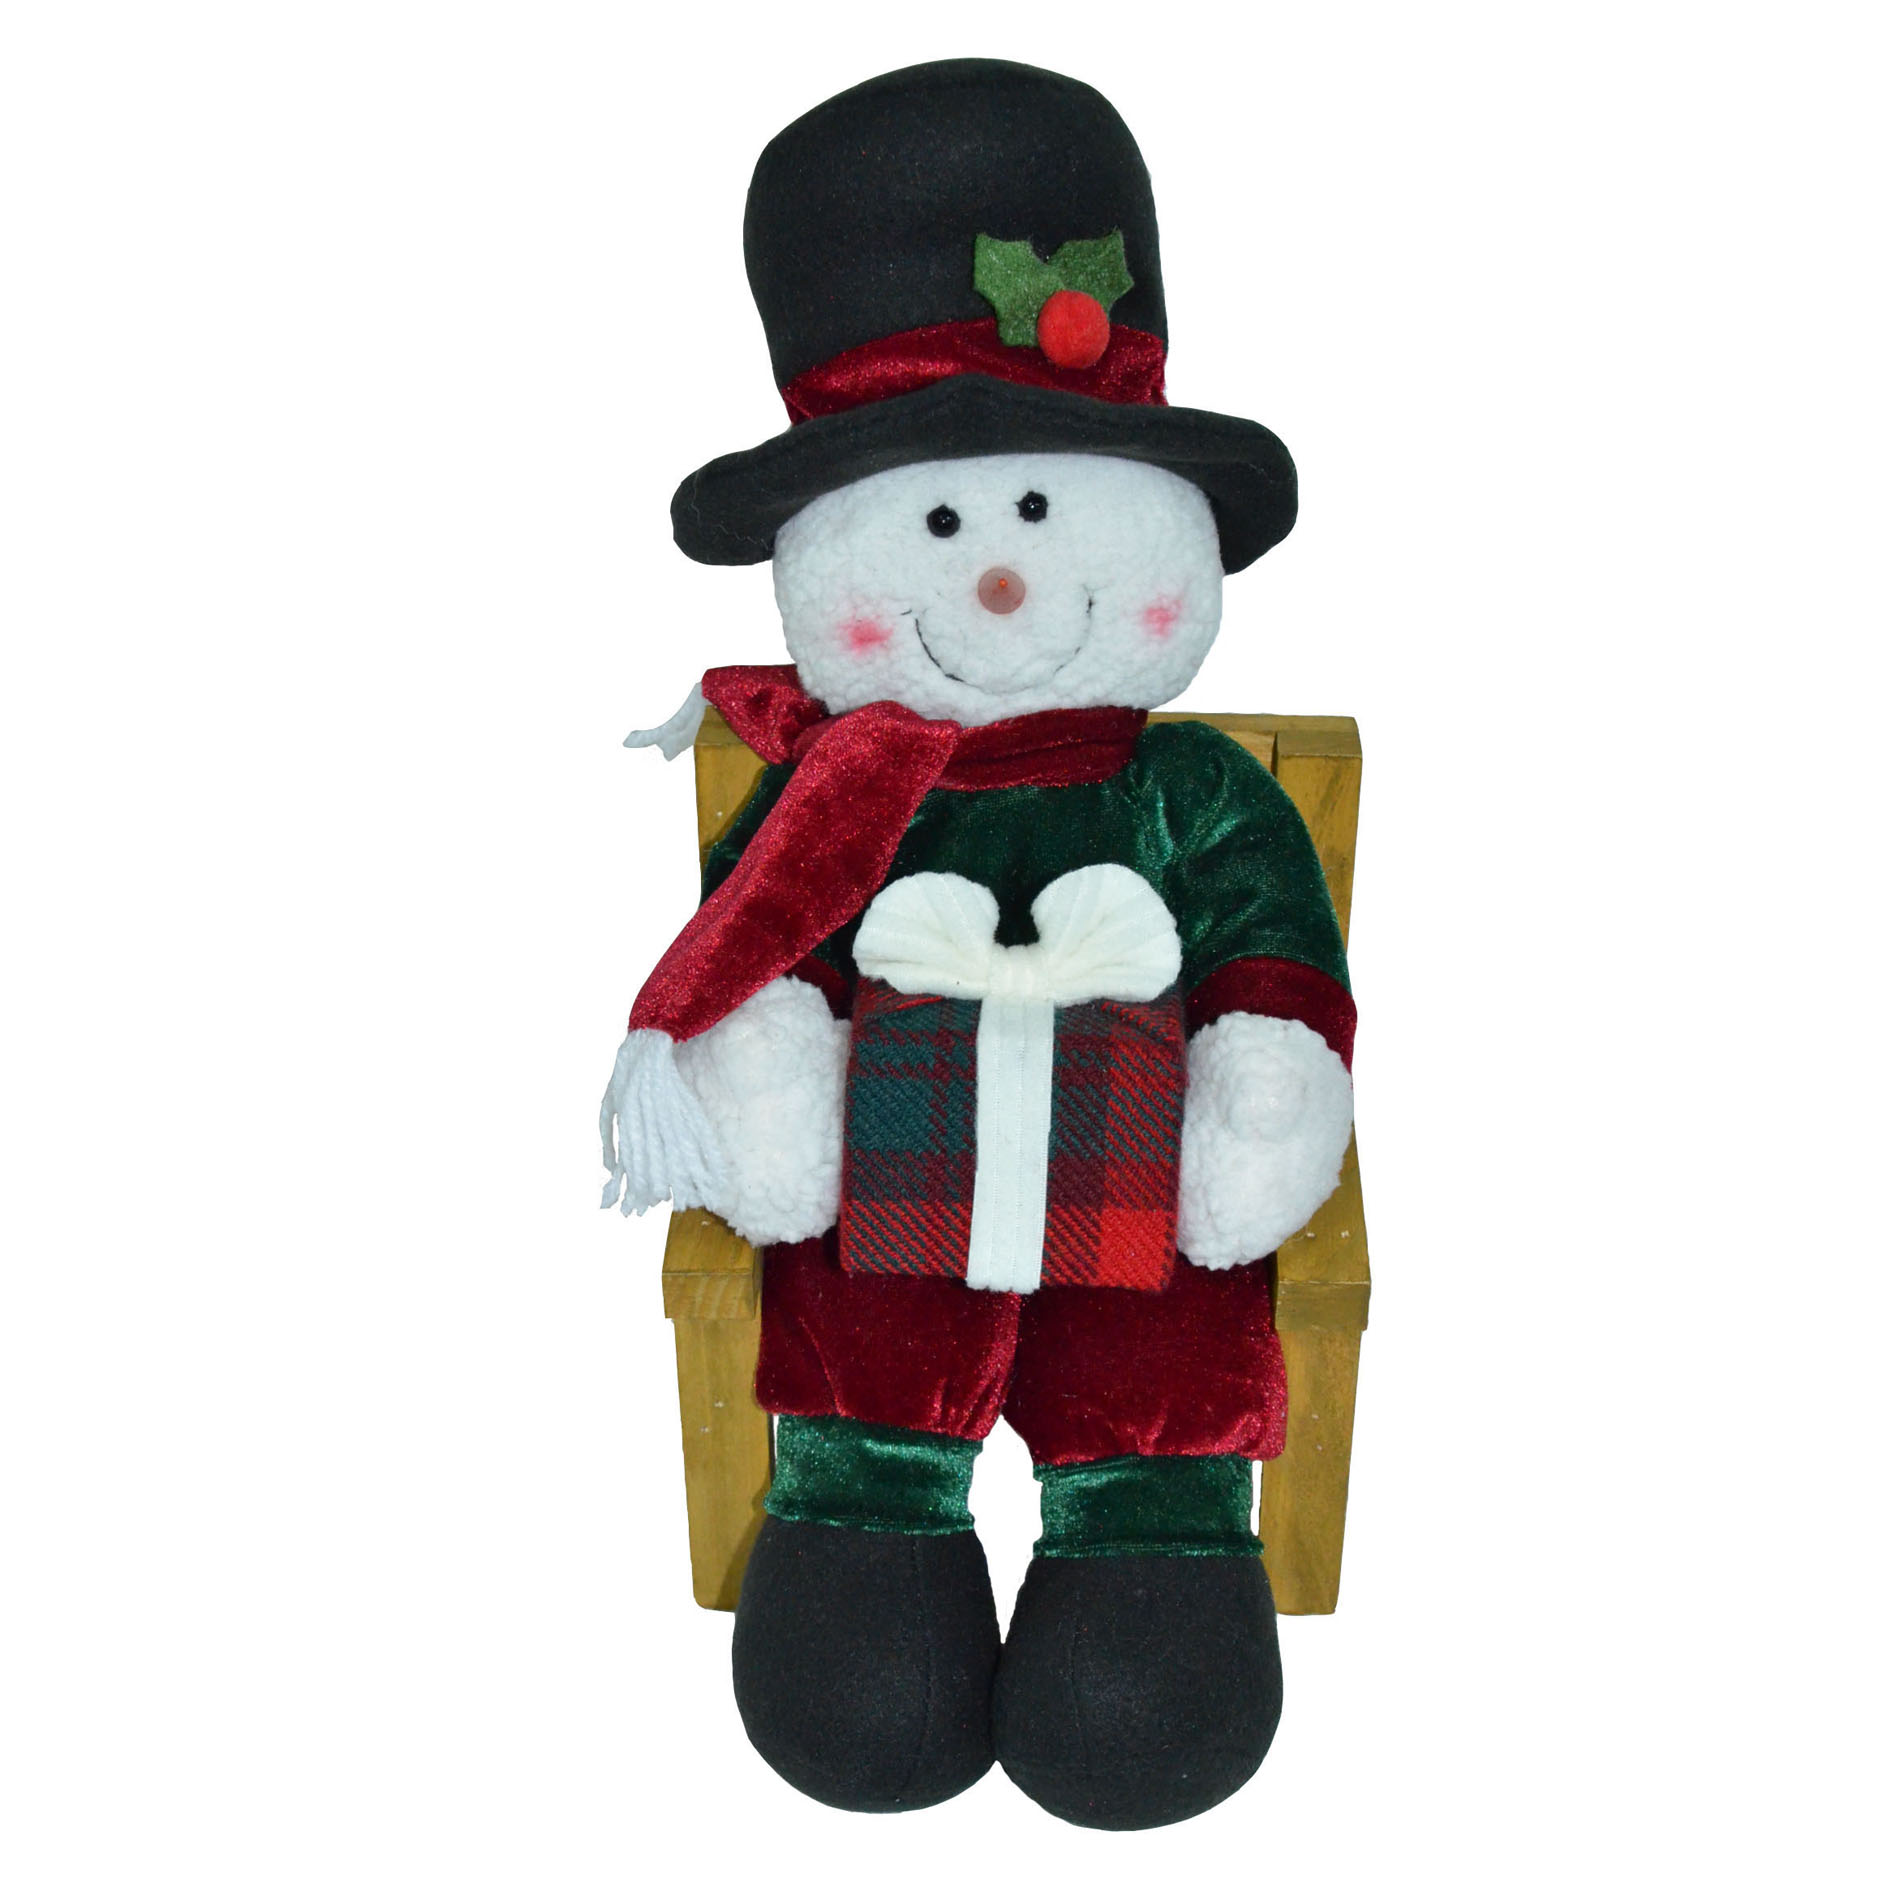 Trimming Traditions 11.5" Fabric Snowman with Top Hat Character on Wood Chair